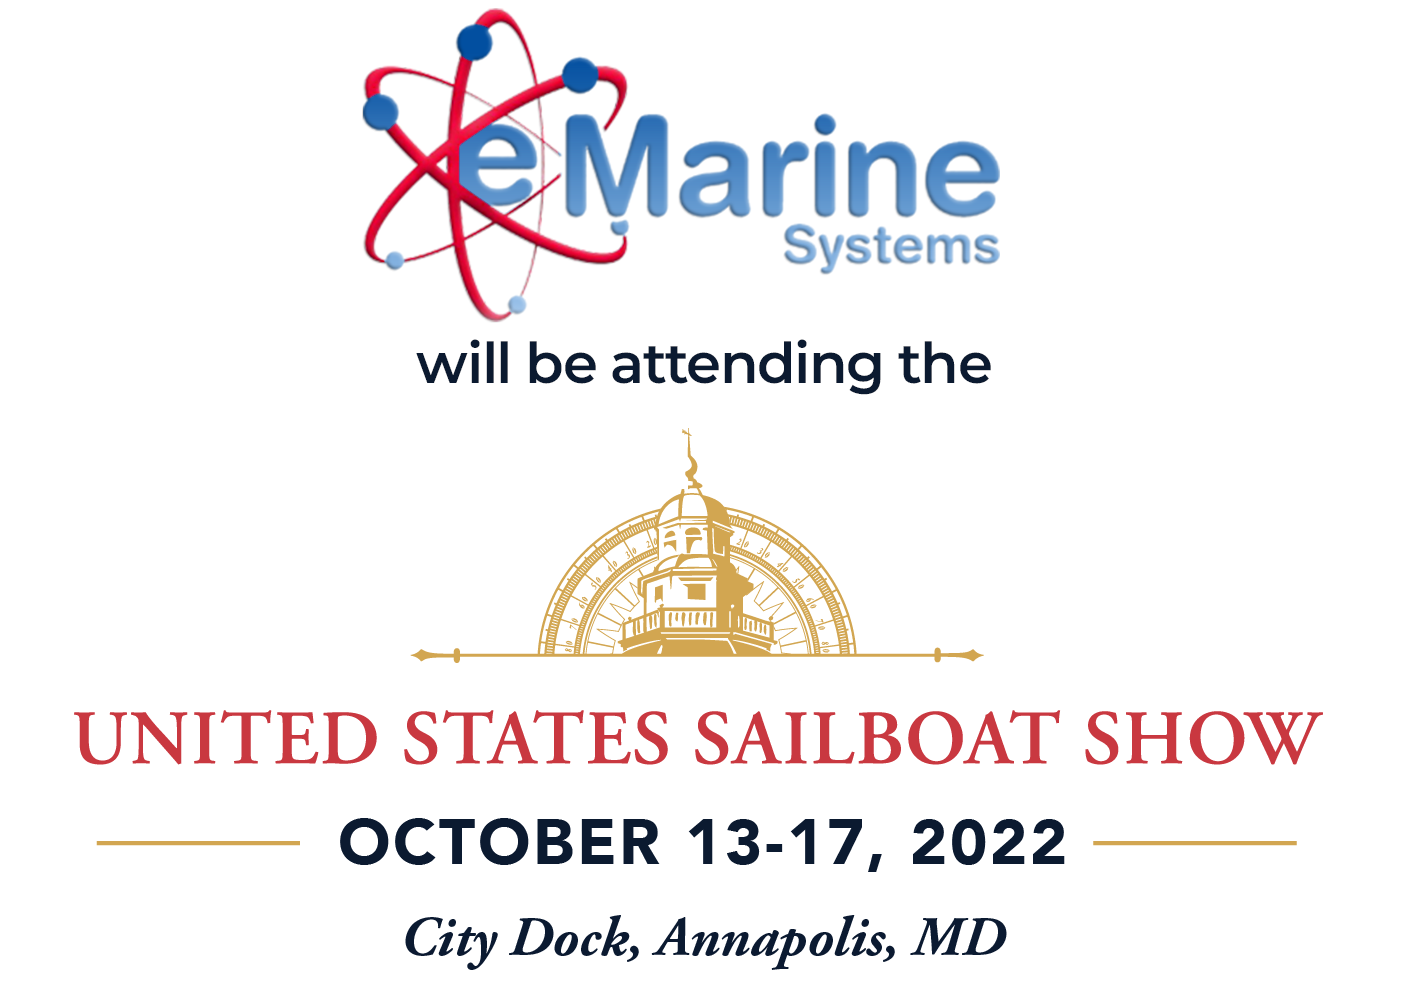 eMarine and Annapolis Boat Show Logo